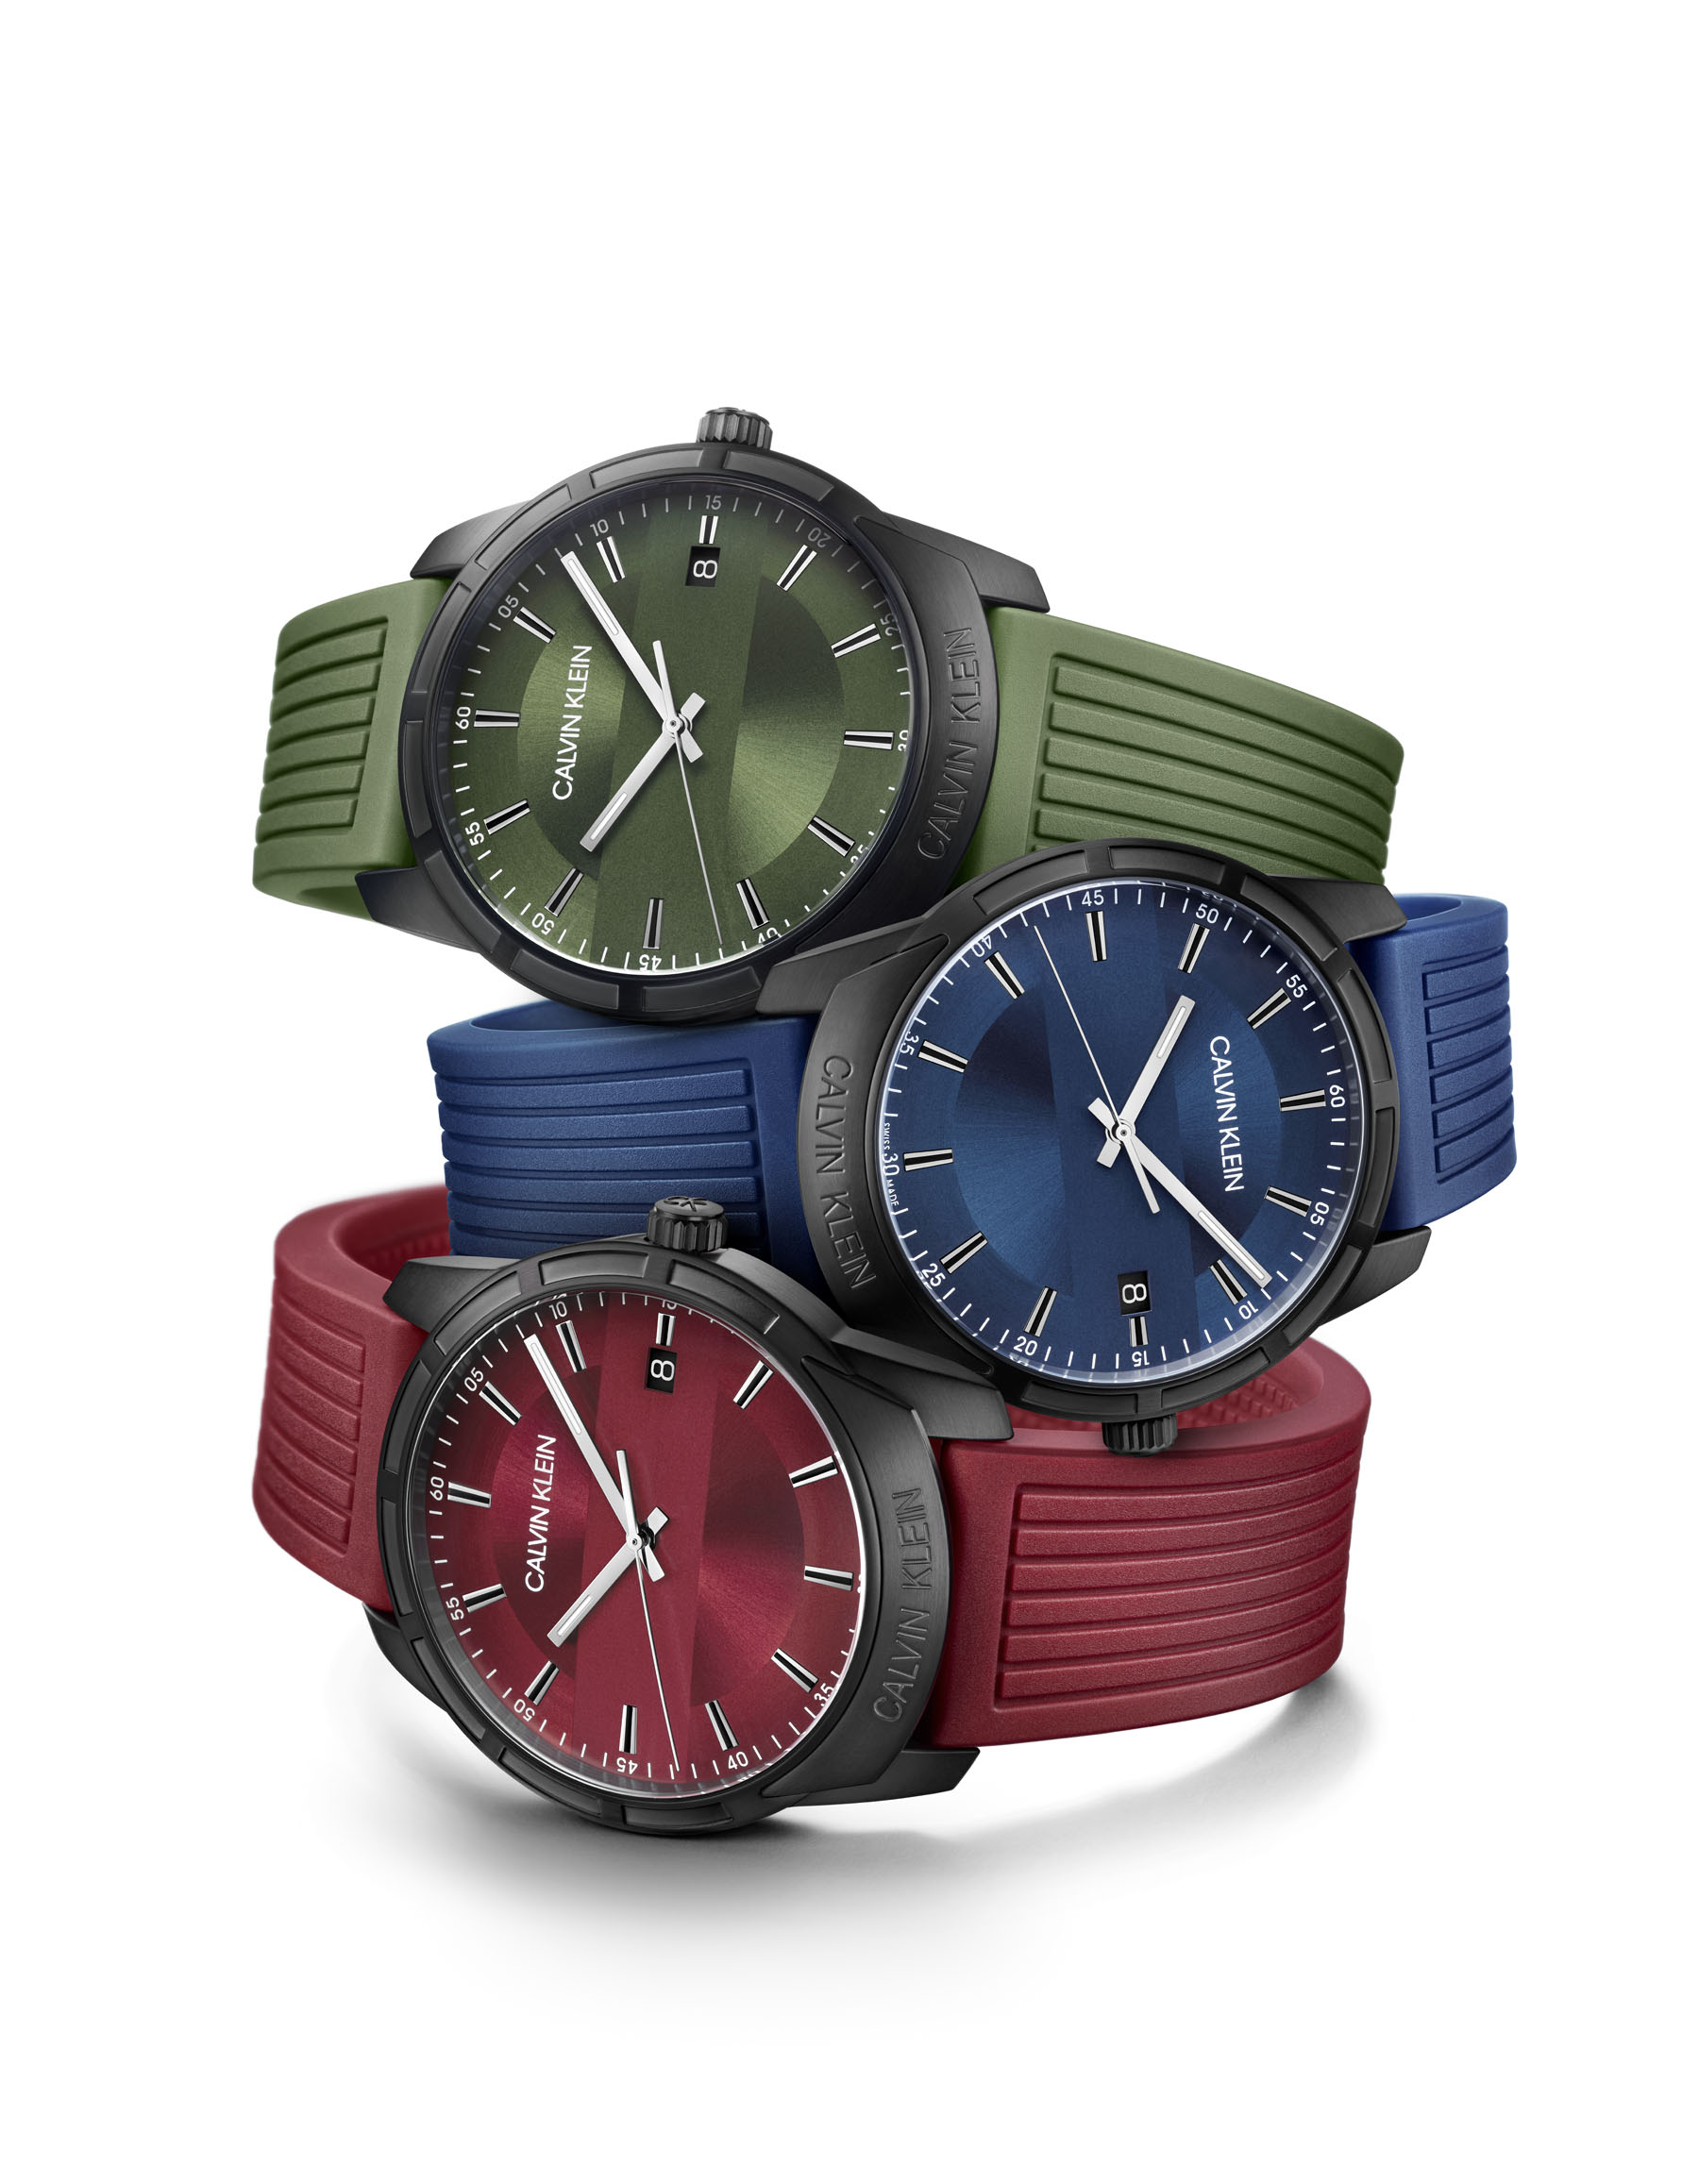 Youthful, sporty pieces for the modern man. Water-resistant to 3 bars, the watch comes in a tonal dial, a designed bezel, and a rubber strap with linear stamping. Available in red, green, black and blue.